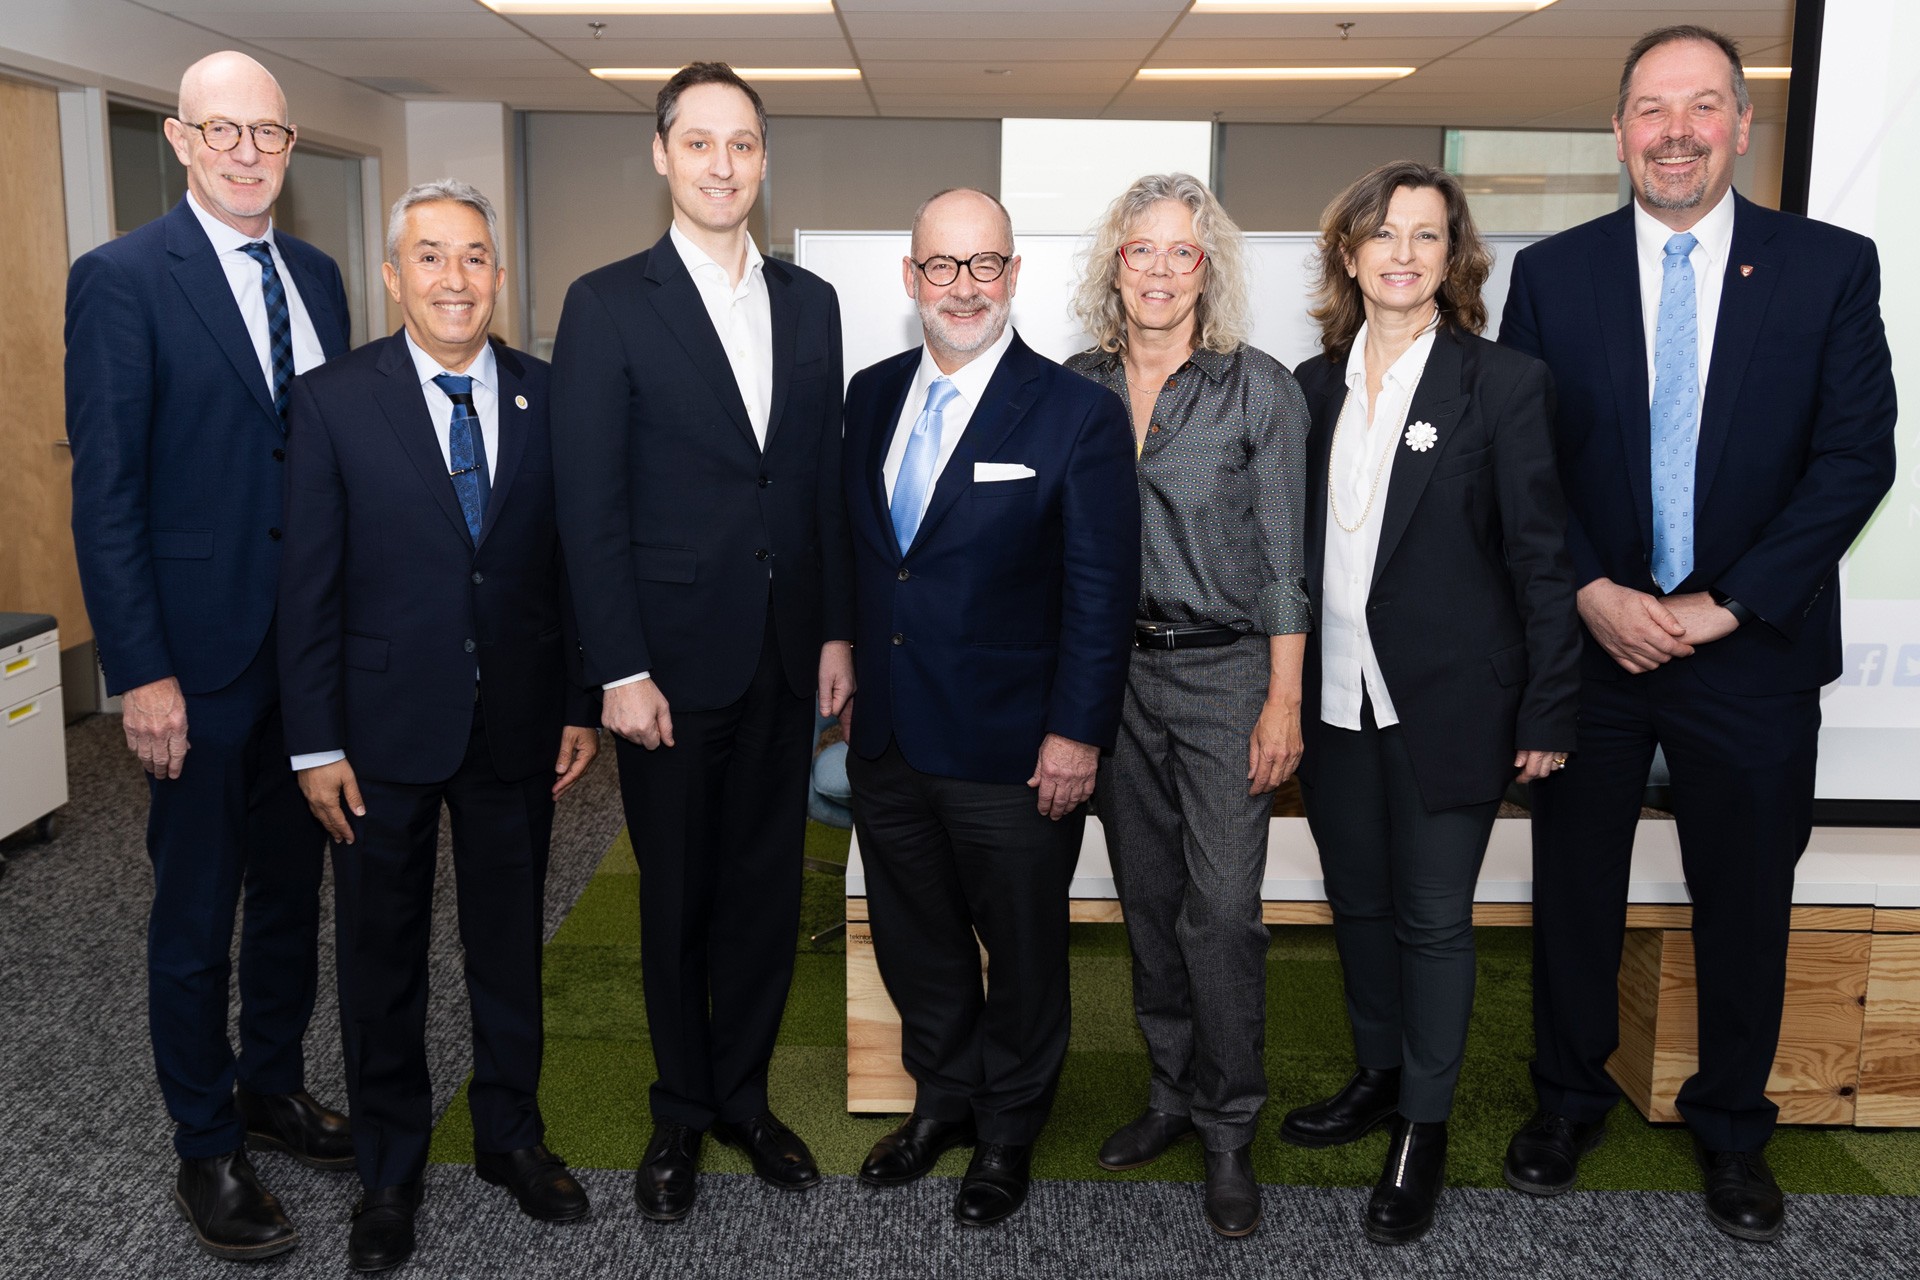 At the Power Corporation gift announcement (pictured from left to right): Concordia President Graham Carr; Karim Zaghib, CEO, Volt-age; Olivier Desmarais, senior vice-president, Power Corporation; Paul Genest, senior vice-president, Power Corporation; Ursula Eicker, director, Next-Generation Cities Institute; Dominique Bérubé, vice-president, research and graduate studies; Paul Chesser, BA 94, GrDip 97, vice-president, Advancement.